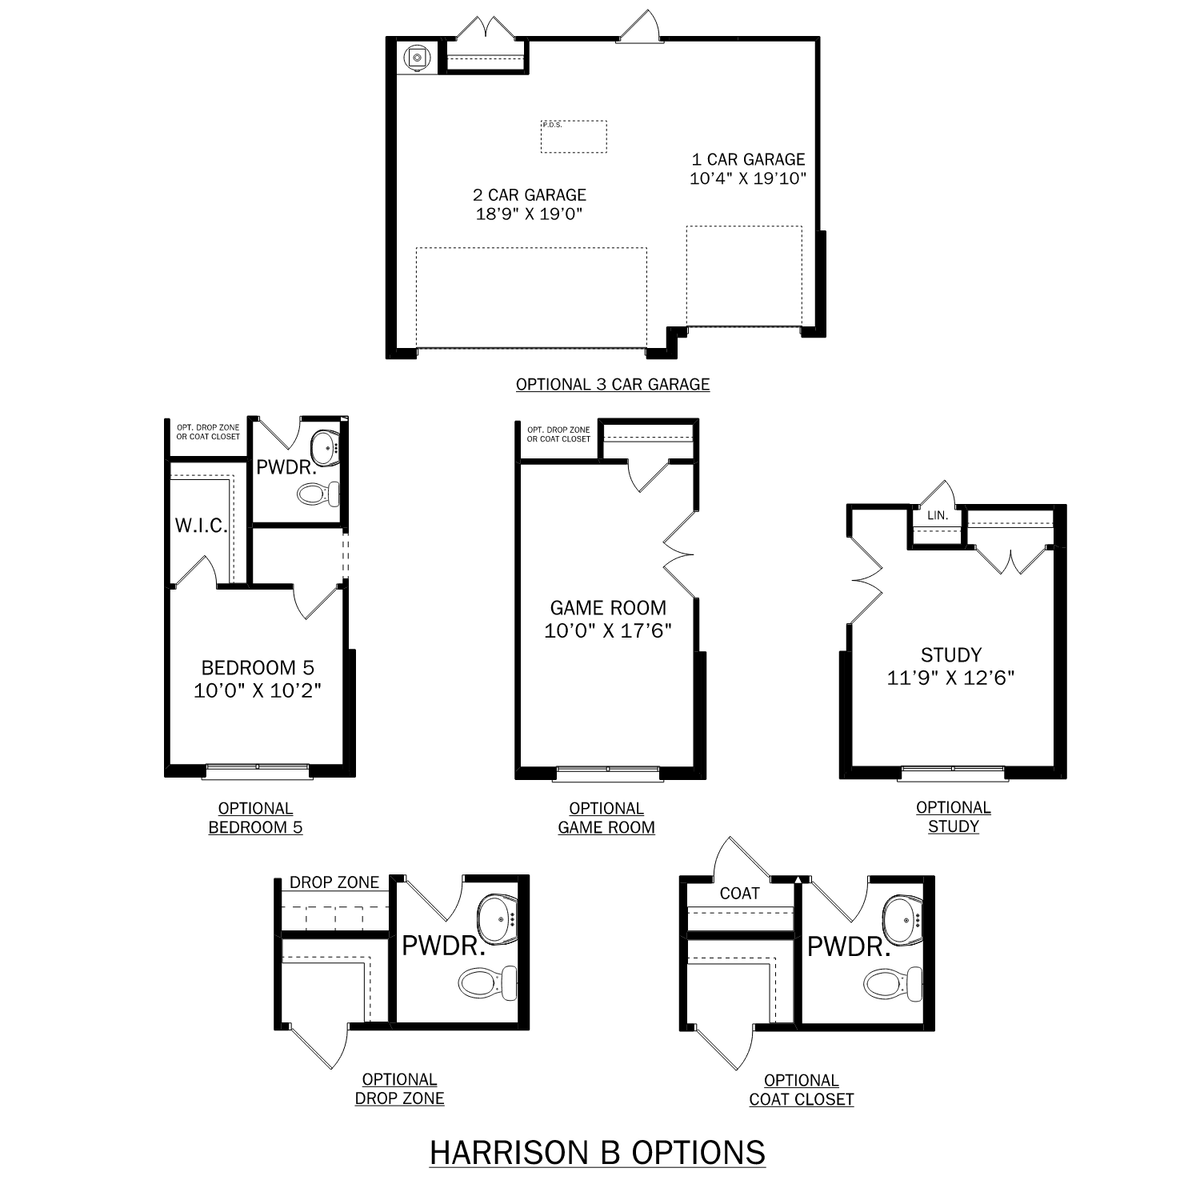 2 - The Harrison B floor plan layout for 1907 Rae Court in Davidson Homes' Cain Park community.